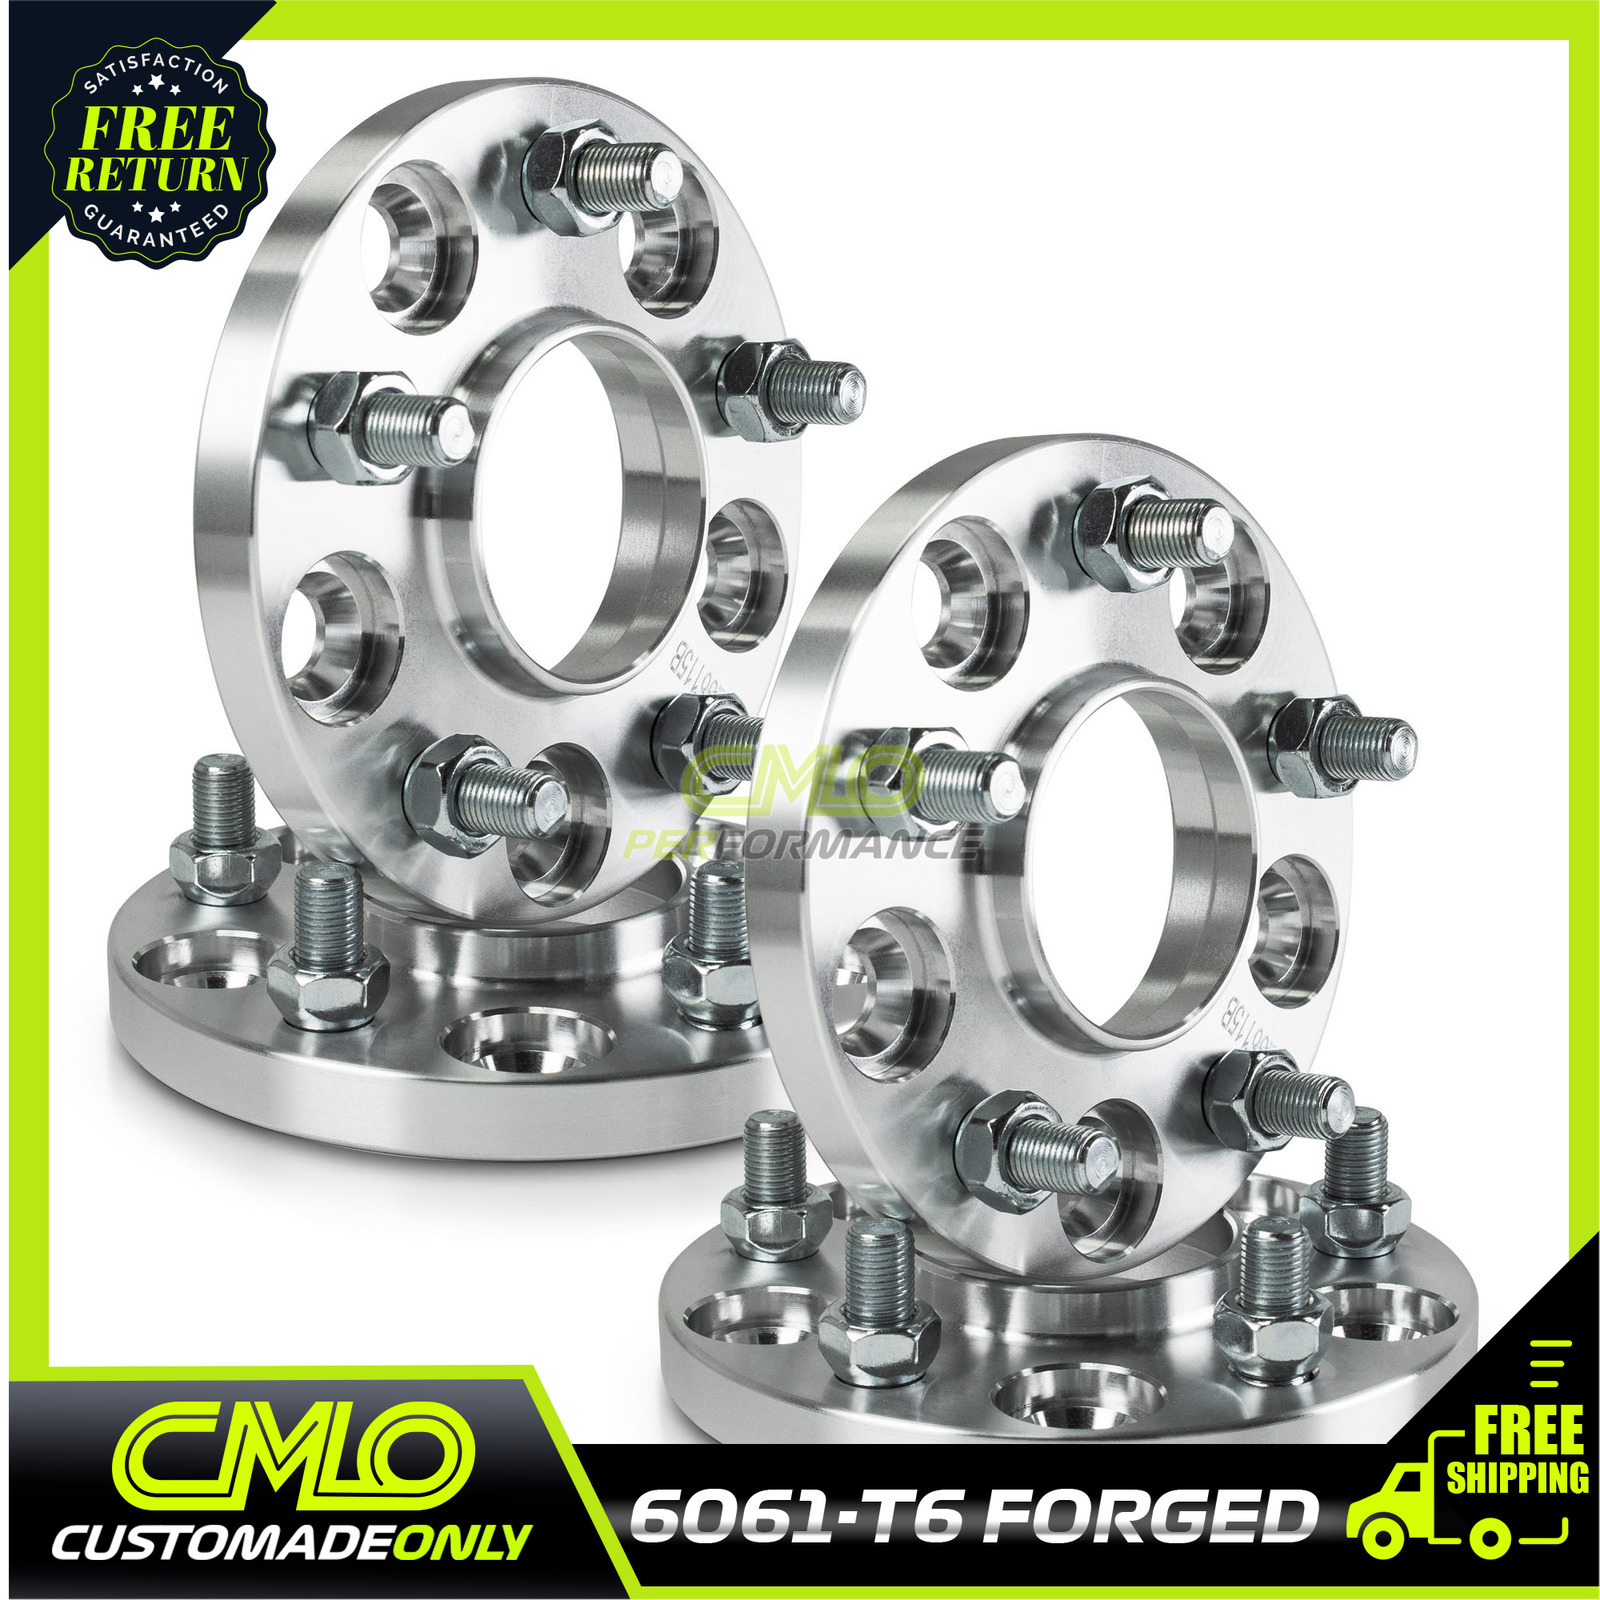 4pc 15mm Hubcentric Wheel Spacers 5x114.3 For 240SX 350Z 370Z G35 G37 Q50 Altima